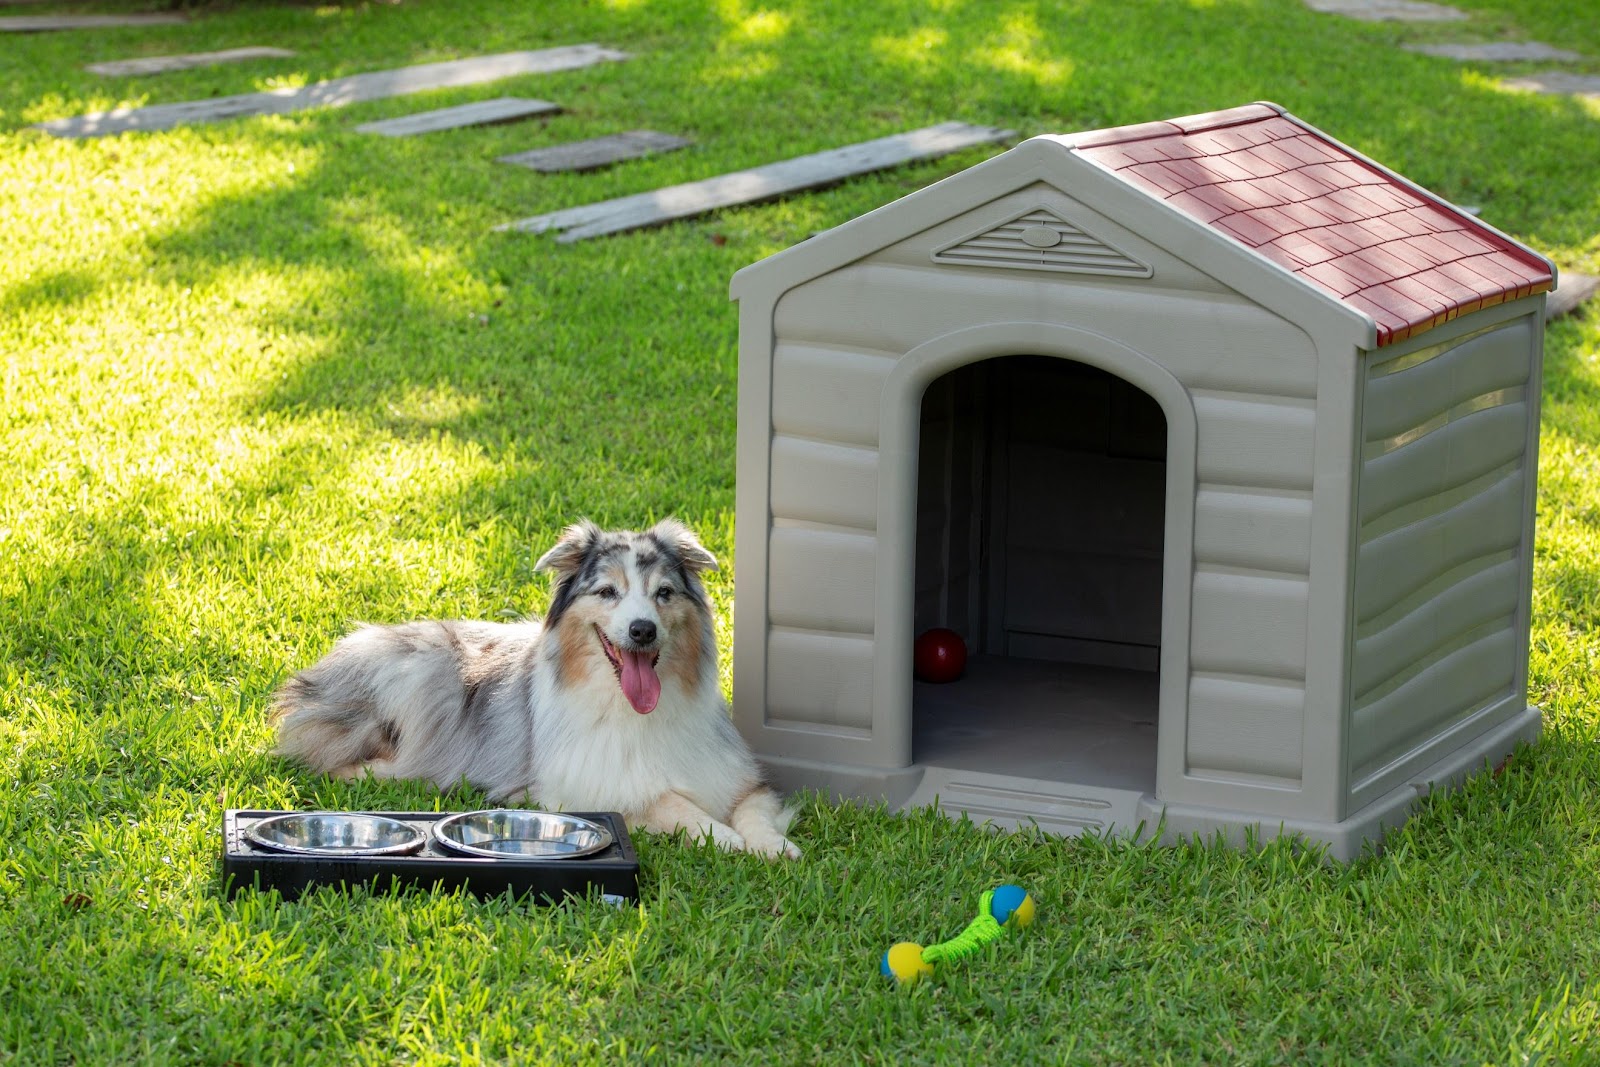 A dog lying in the grass next to a dog house

Description automatically generated